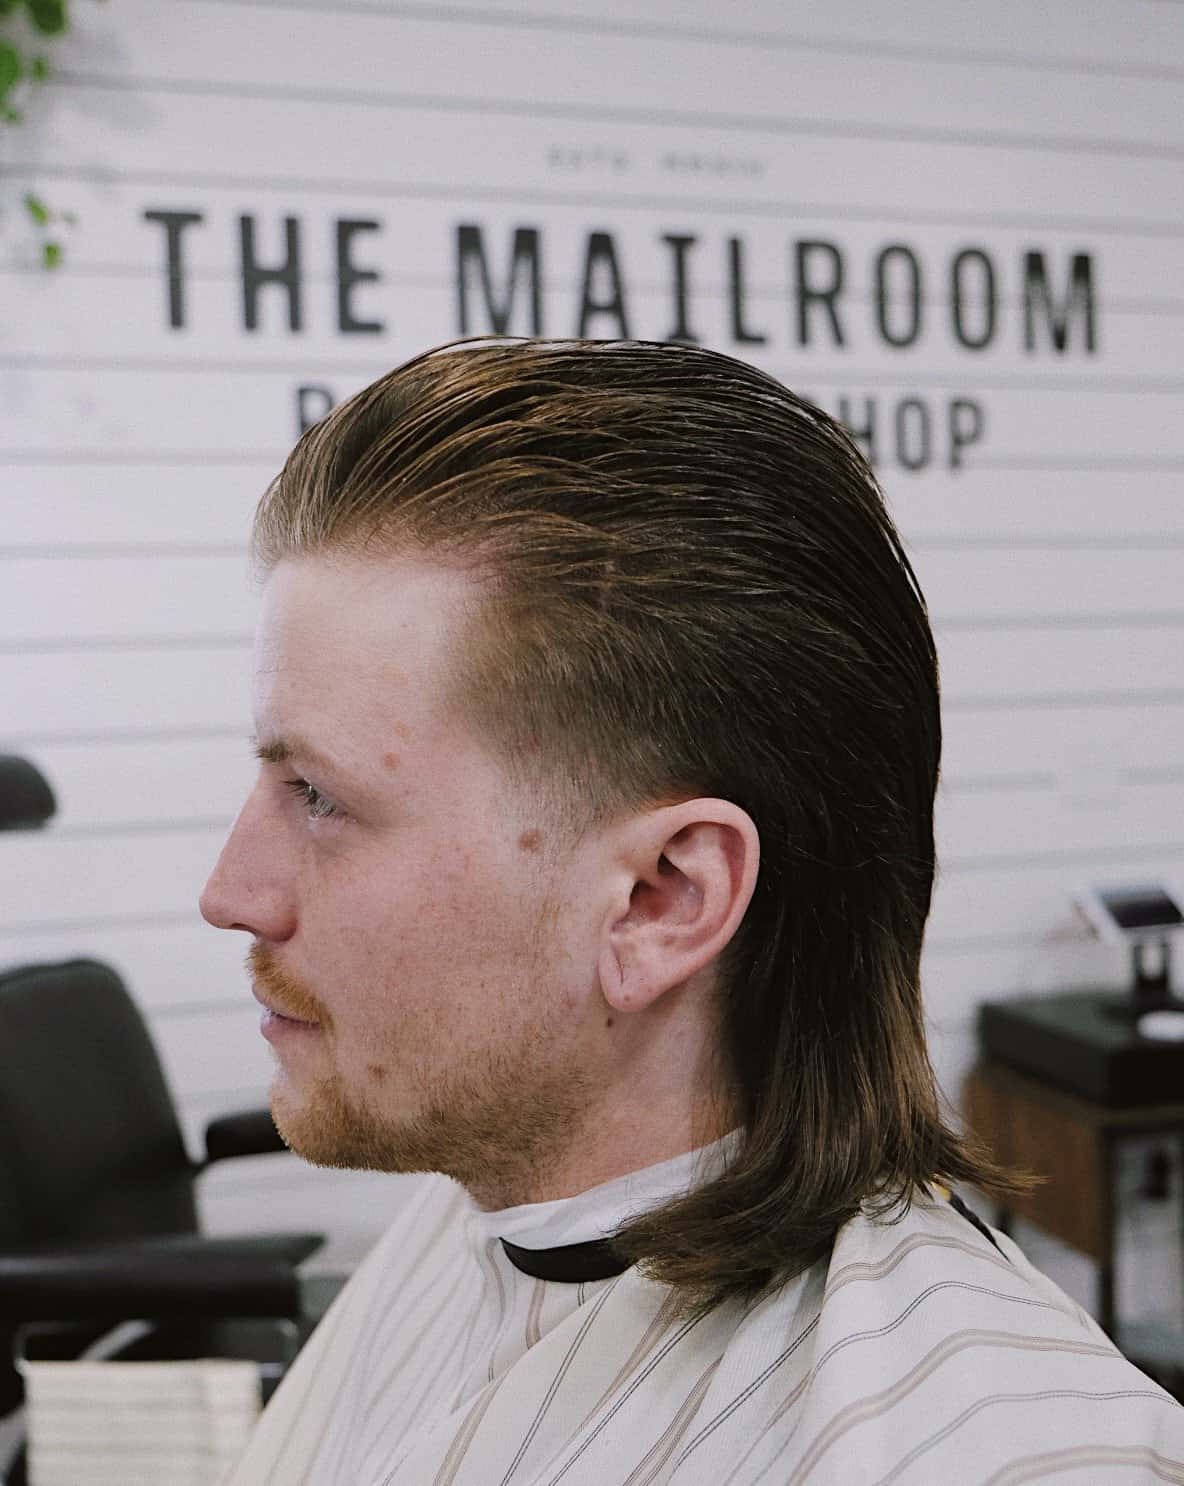 Are Mullets Coming Back The Mailroom Barber Co